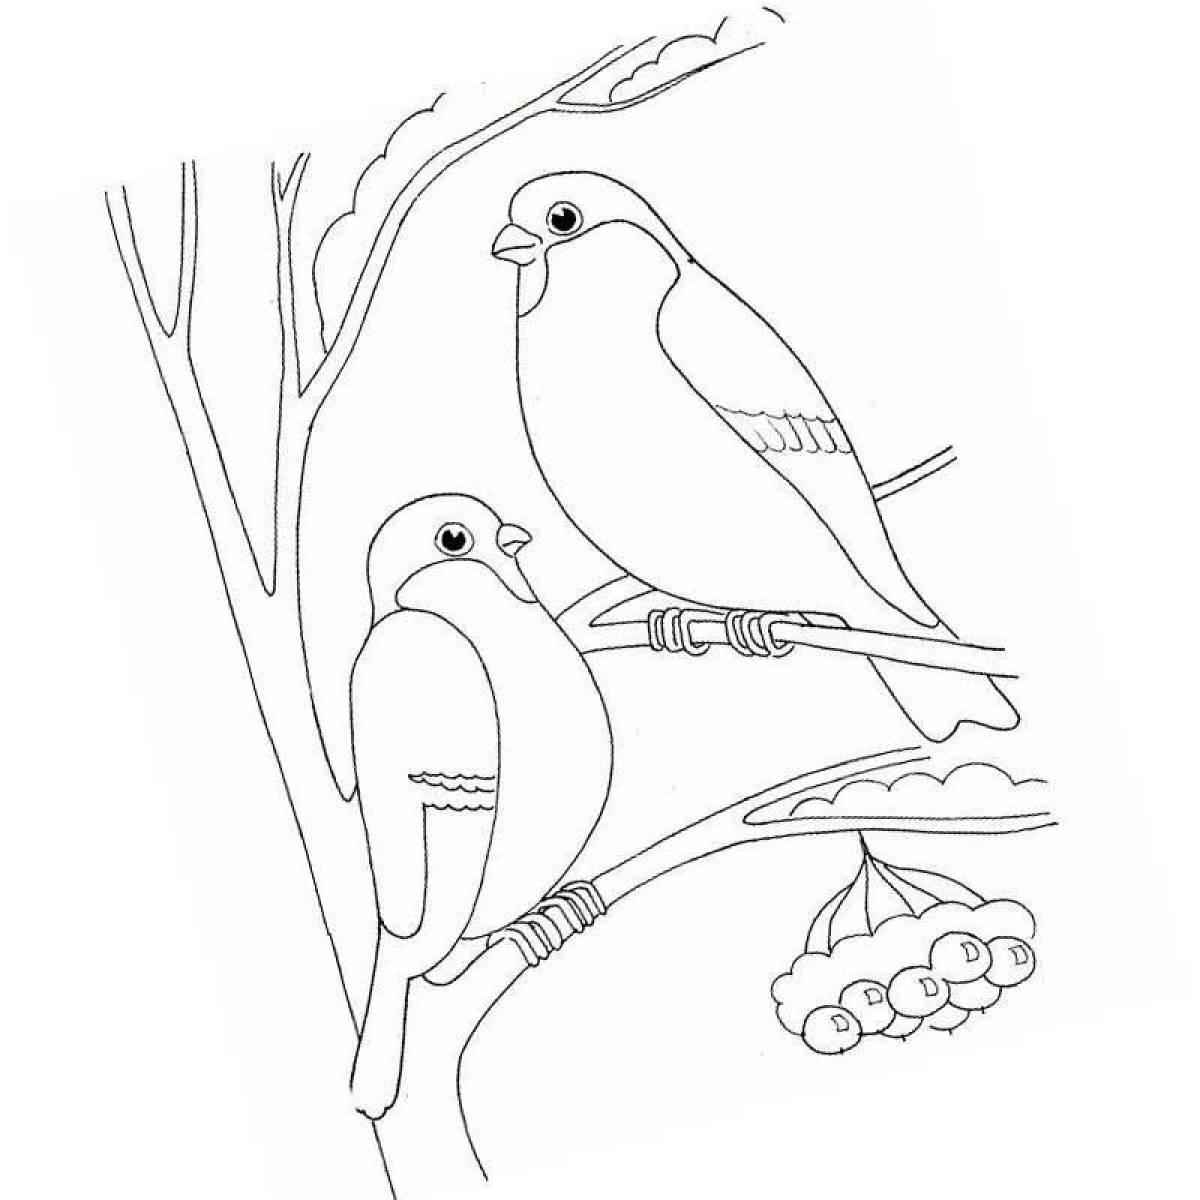 Coloring page energetic wintering birds for children 5-6 years old